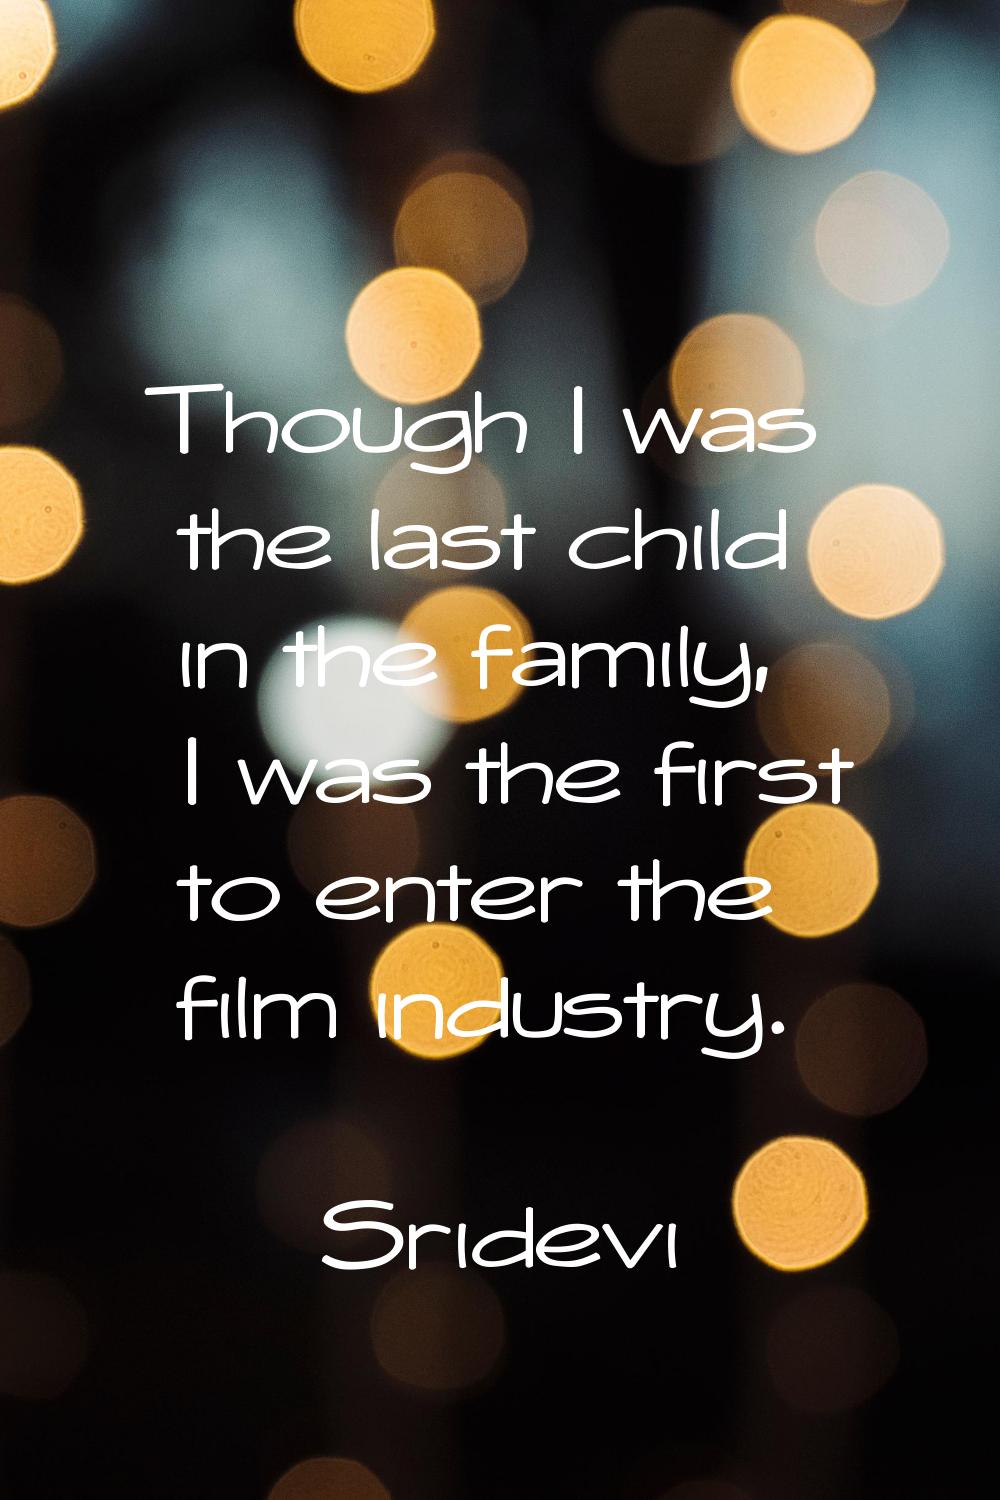 Though I was the last child in the family, I was the first to enter the film industry.